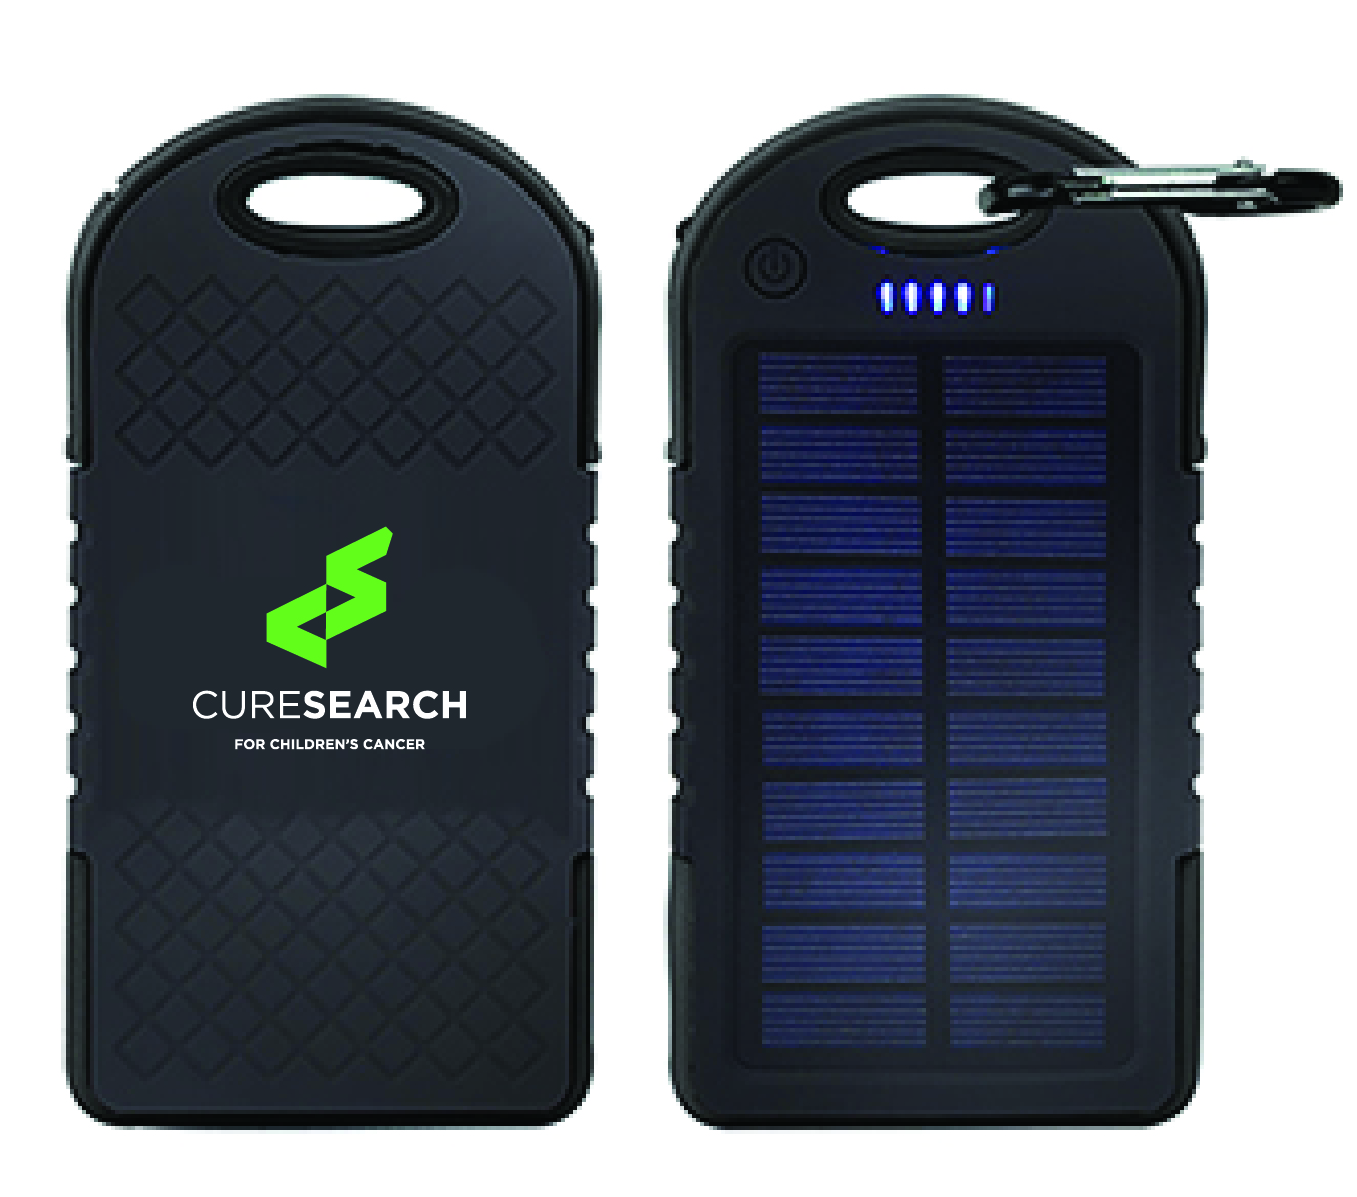 Solar charger image.jpg